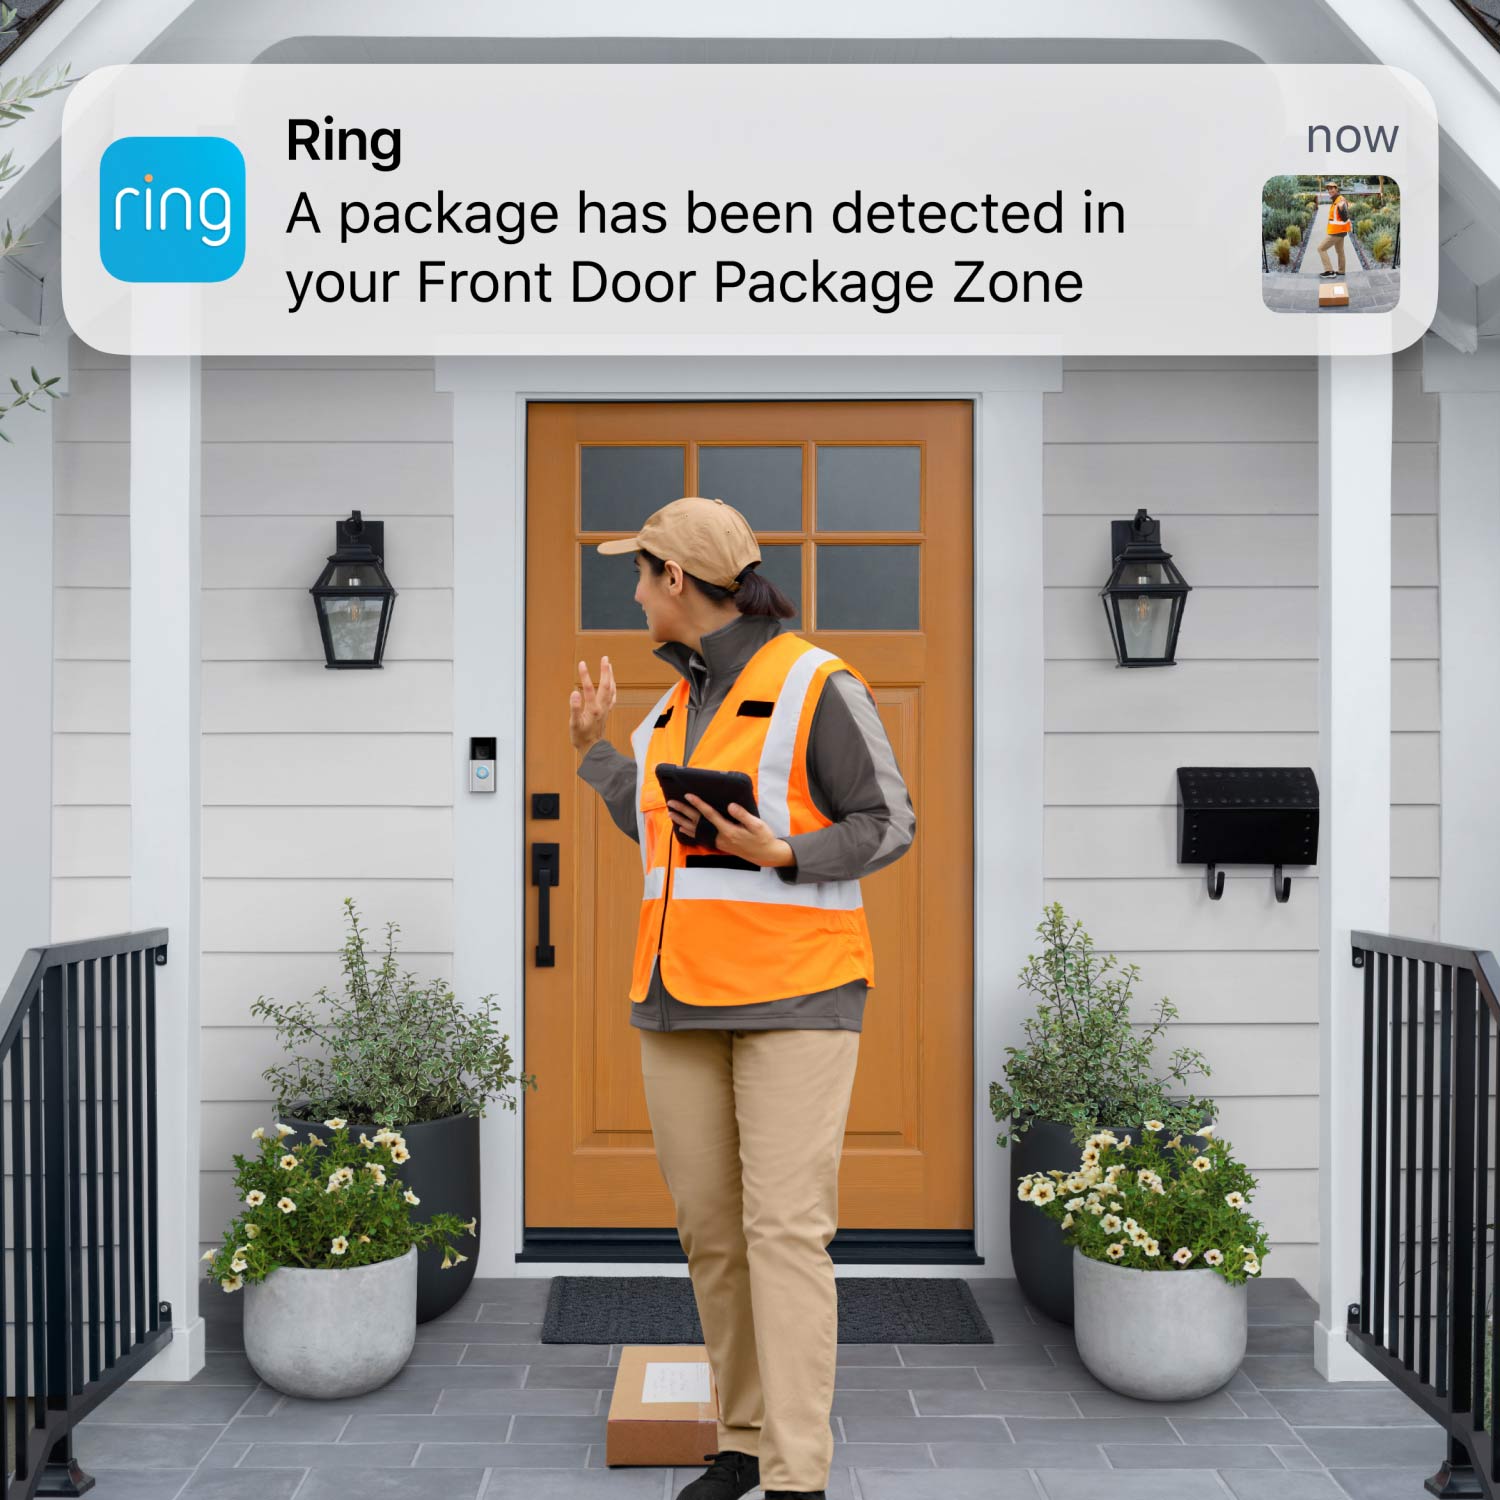 Wired Doorbell Pro (Formerly: Video Doorbell Pro 2) - Person waving at a doorbell camera after delivering a package. Ring push-notification reads: 